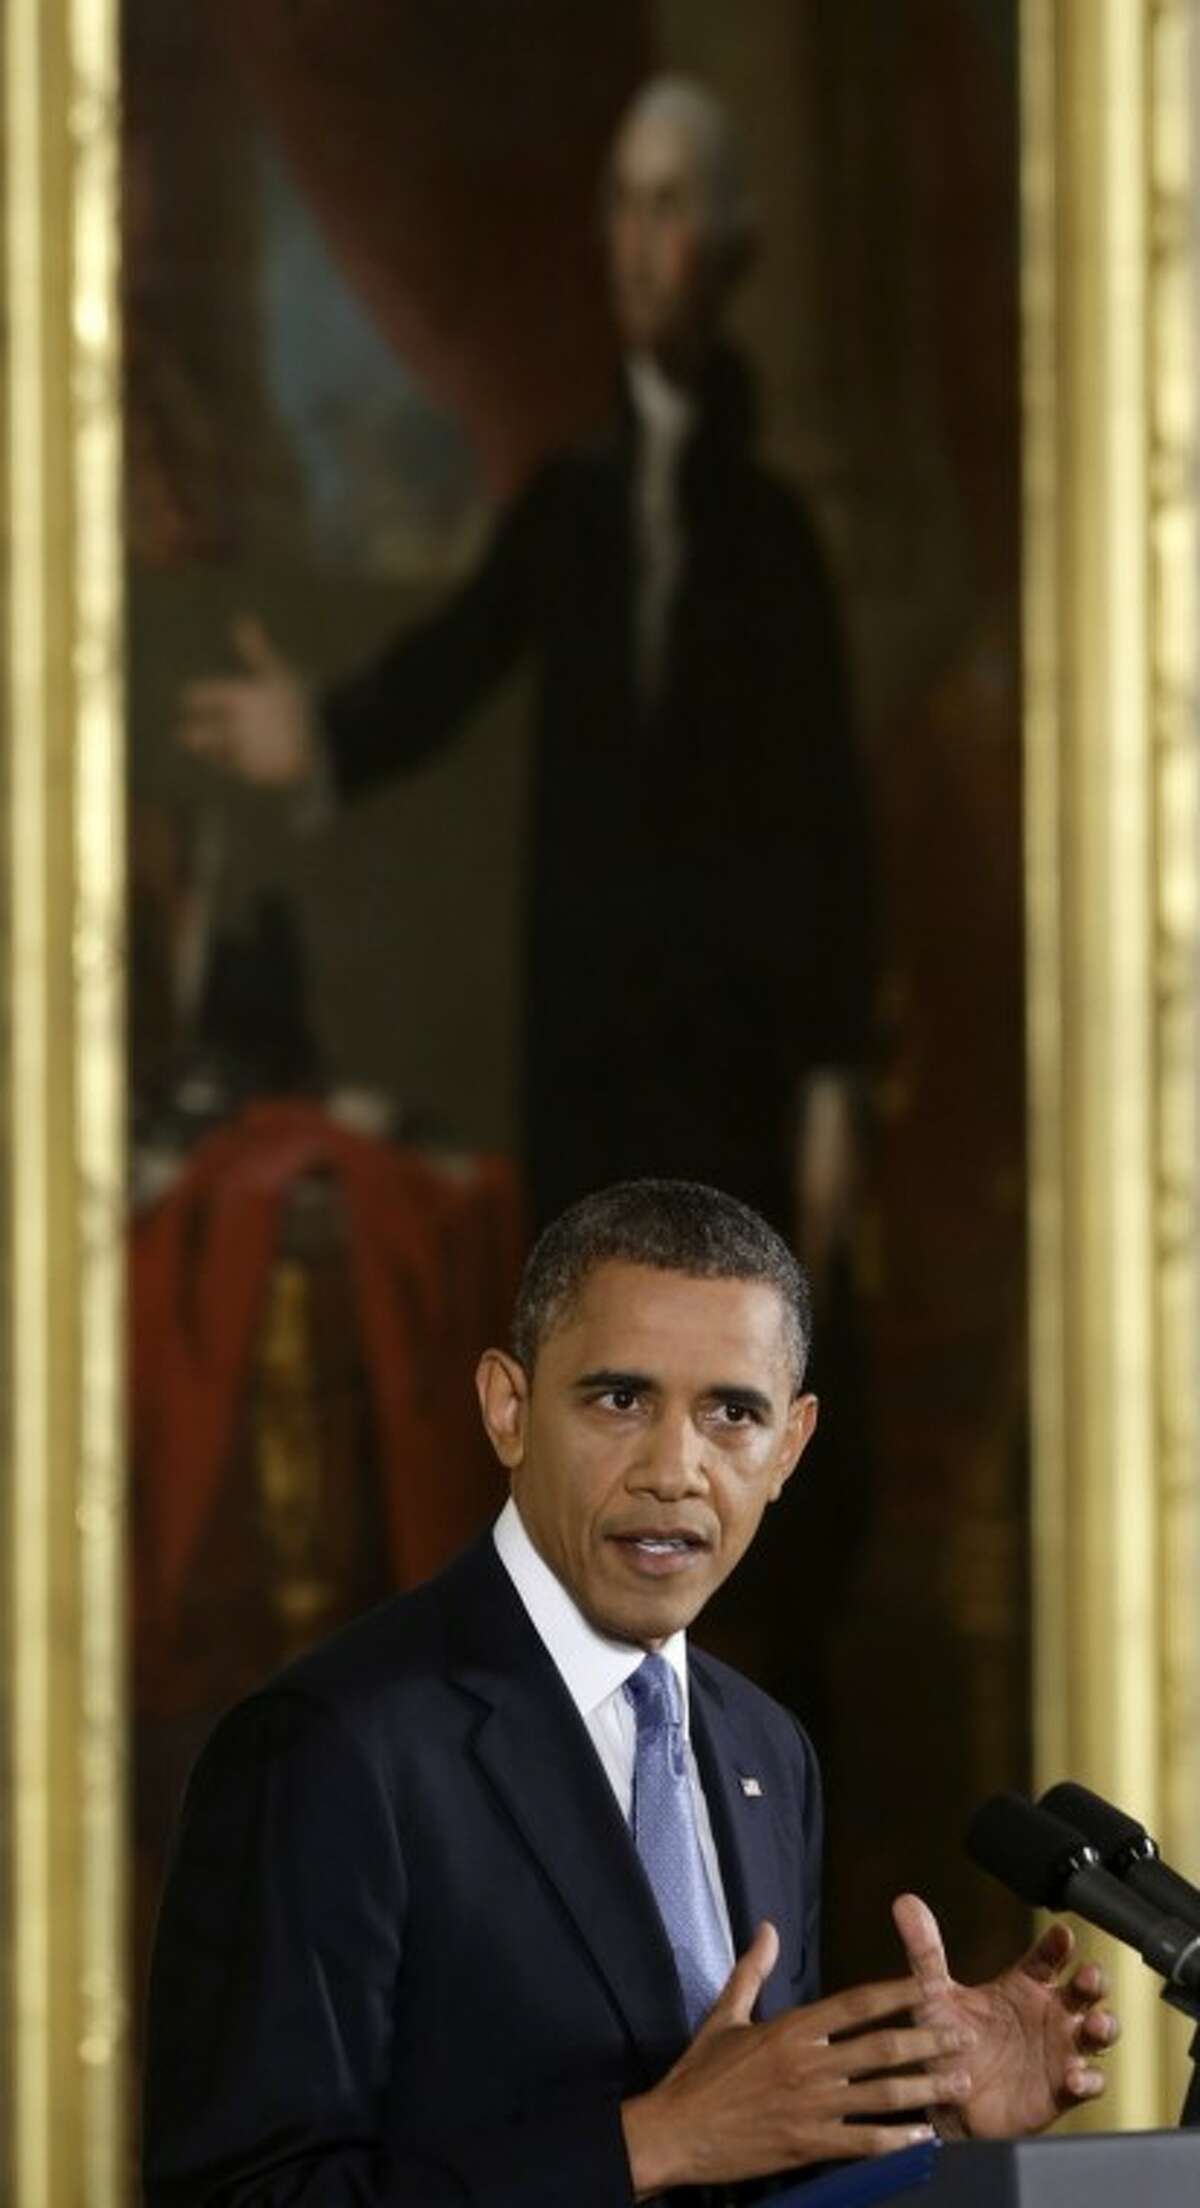 President Barack Obama makes an opening statement during a news conference in the East Room of the White House in Washington Wednesday, Nov. 14, 2012. (AP Photo/Charles Dharapak)